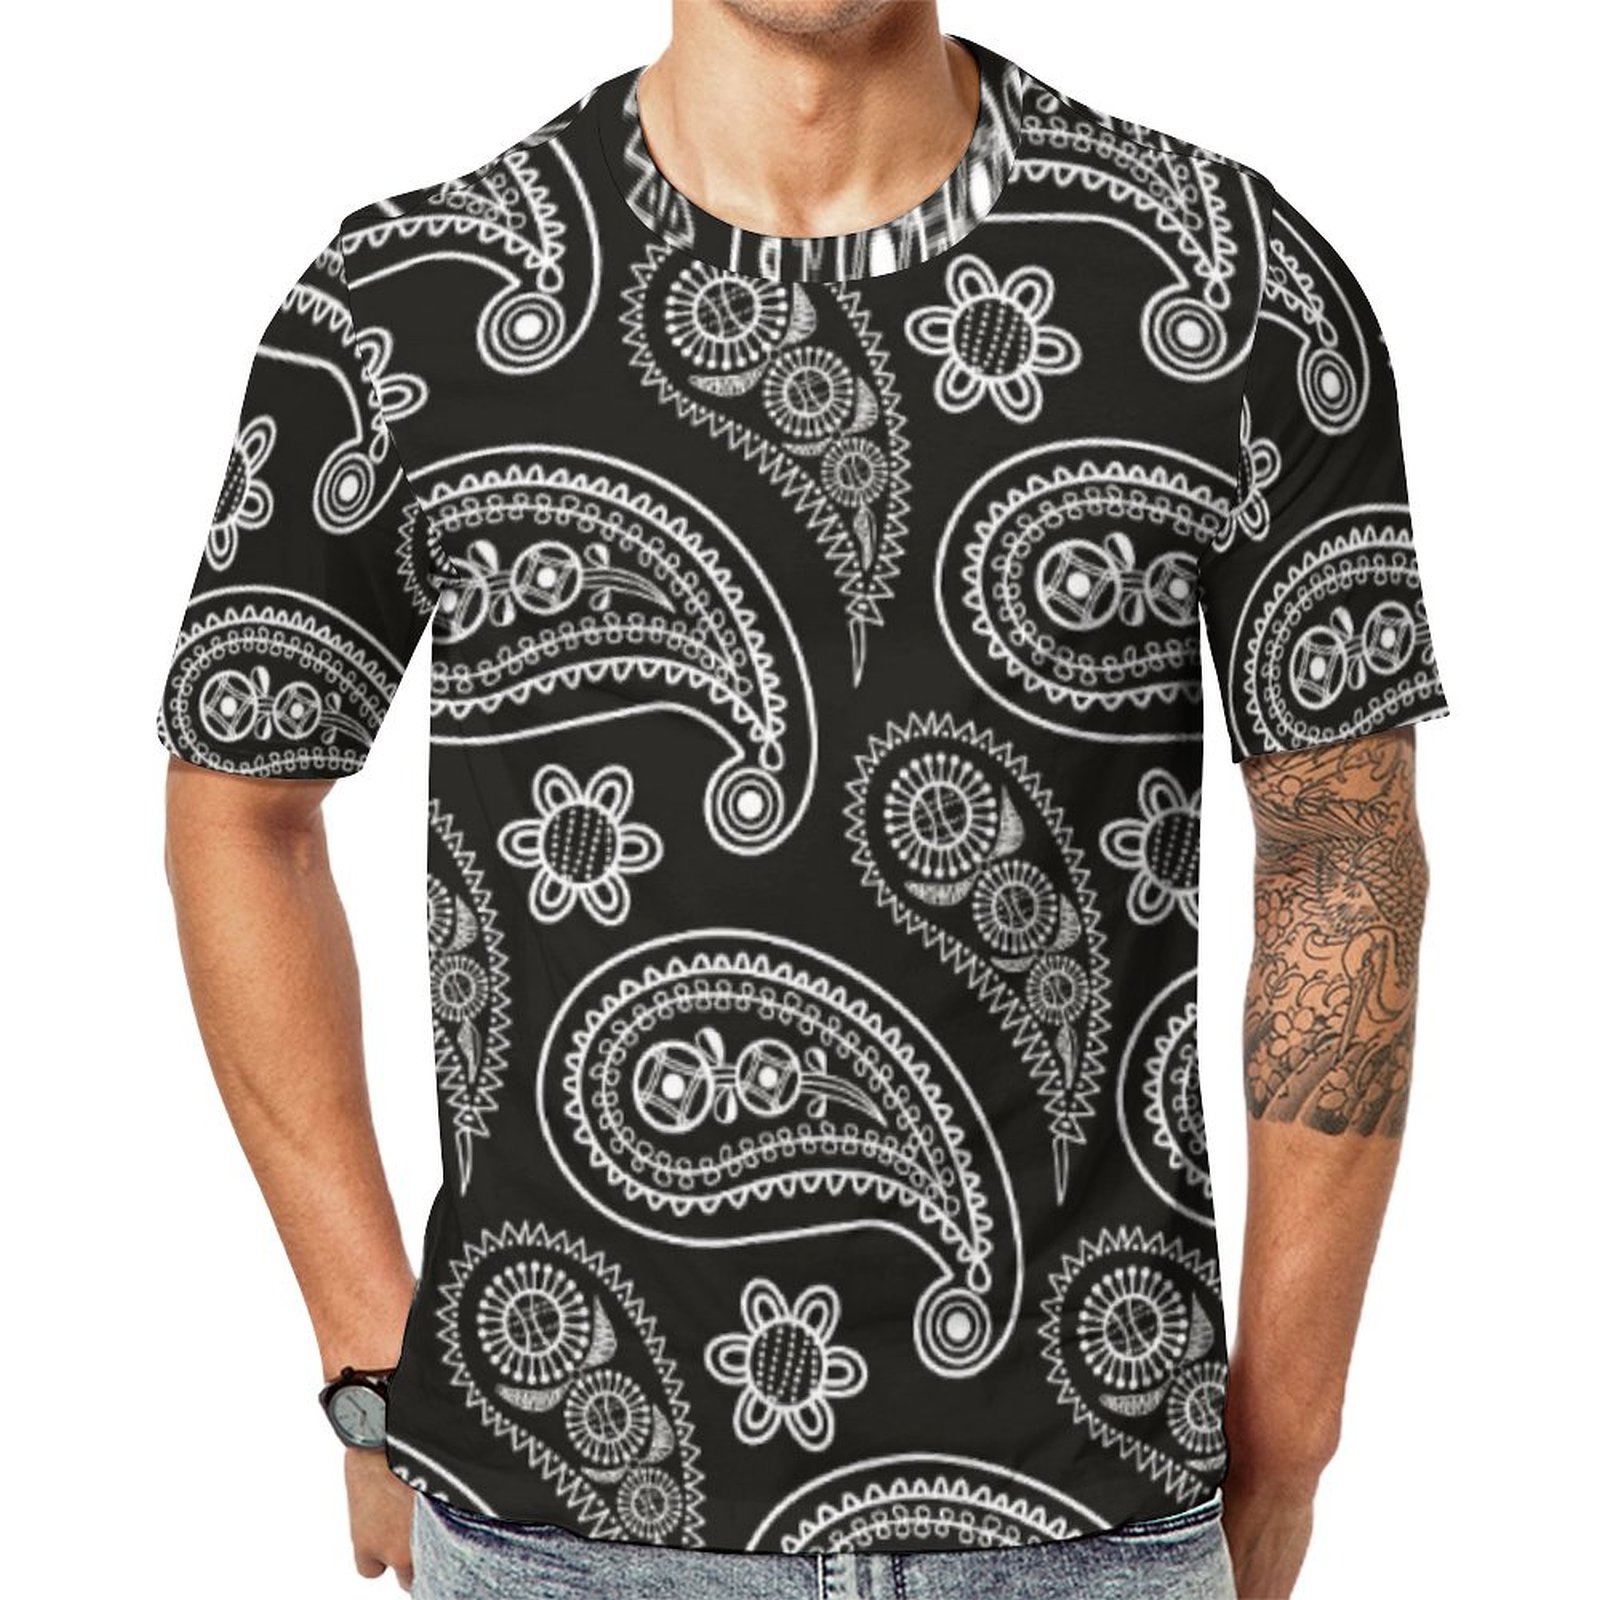 Black And White Paisley Ethnic Short Sleeve Print Unisex Tshirt Summer Casual Tees for Men and Women Coolcoshirts